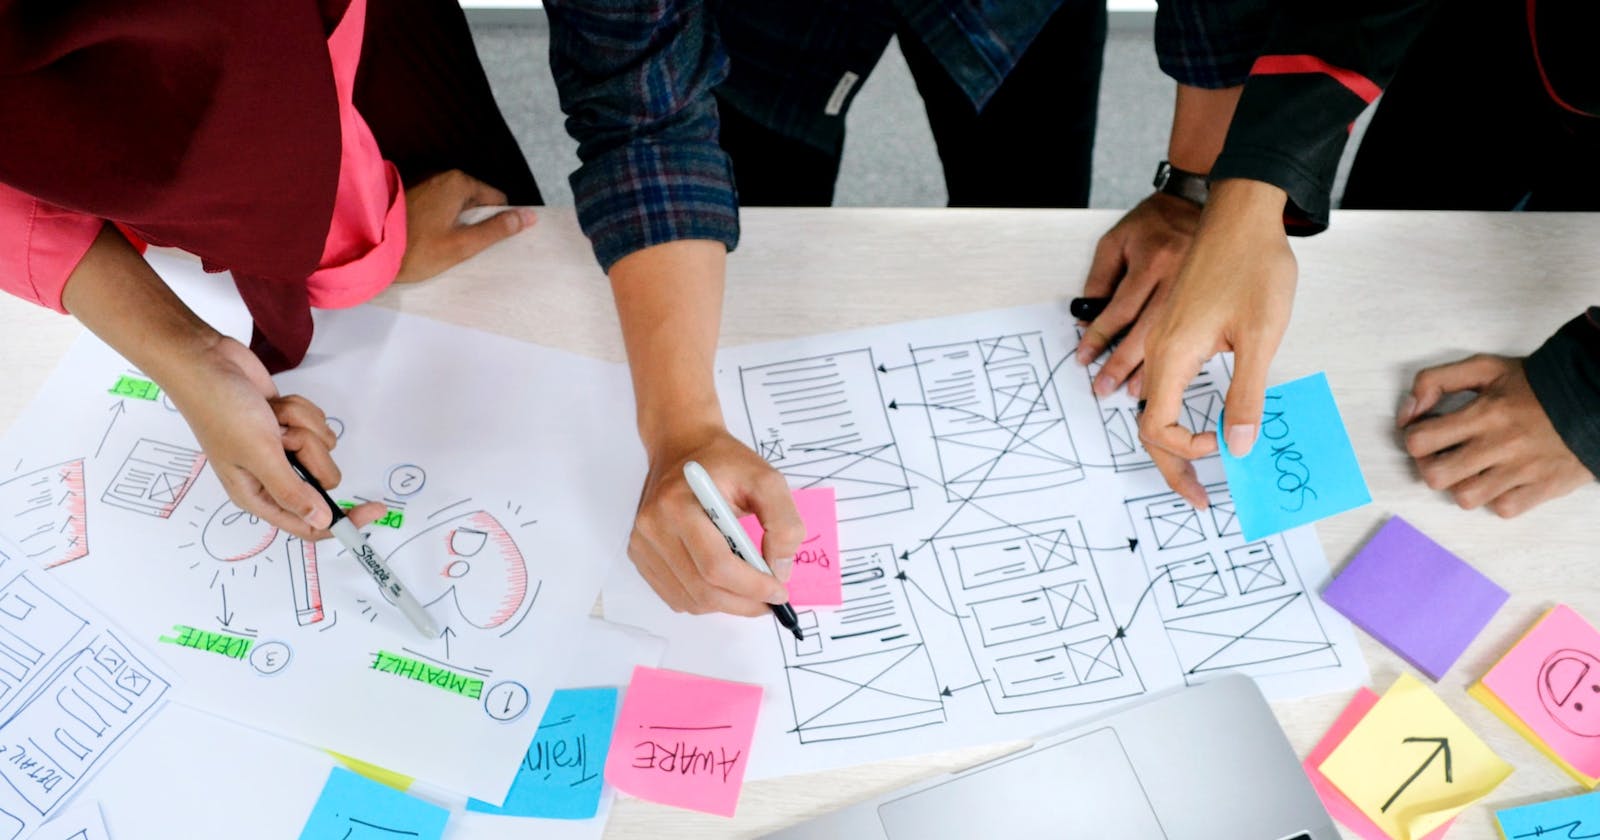 Why Human-Centered Design is Important to Front-End Development